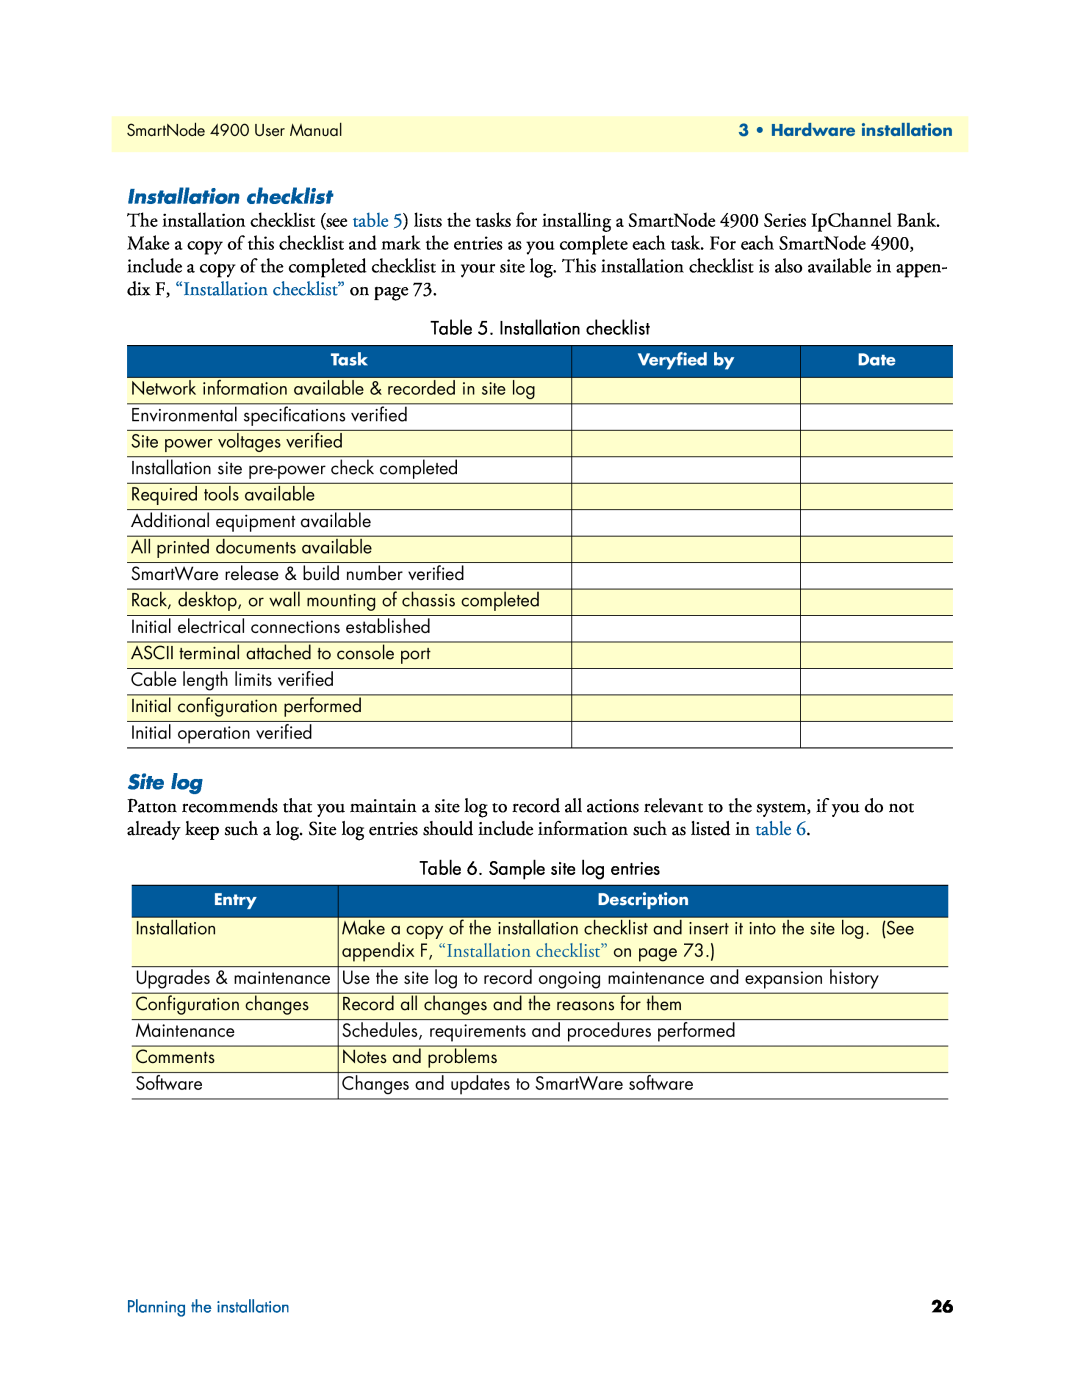 Patton electronic 4900 user manual Site log, appendix F, “Installation checklist” on page 